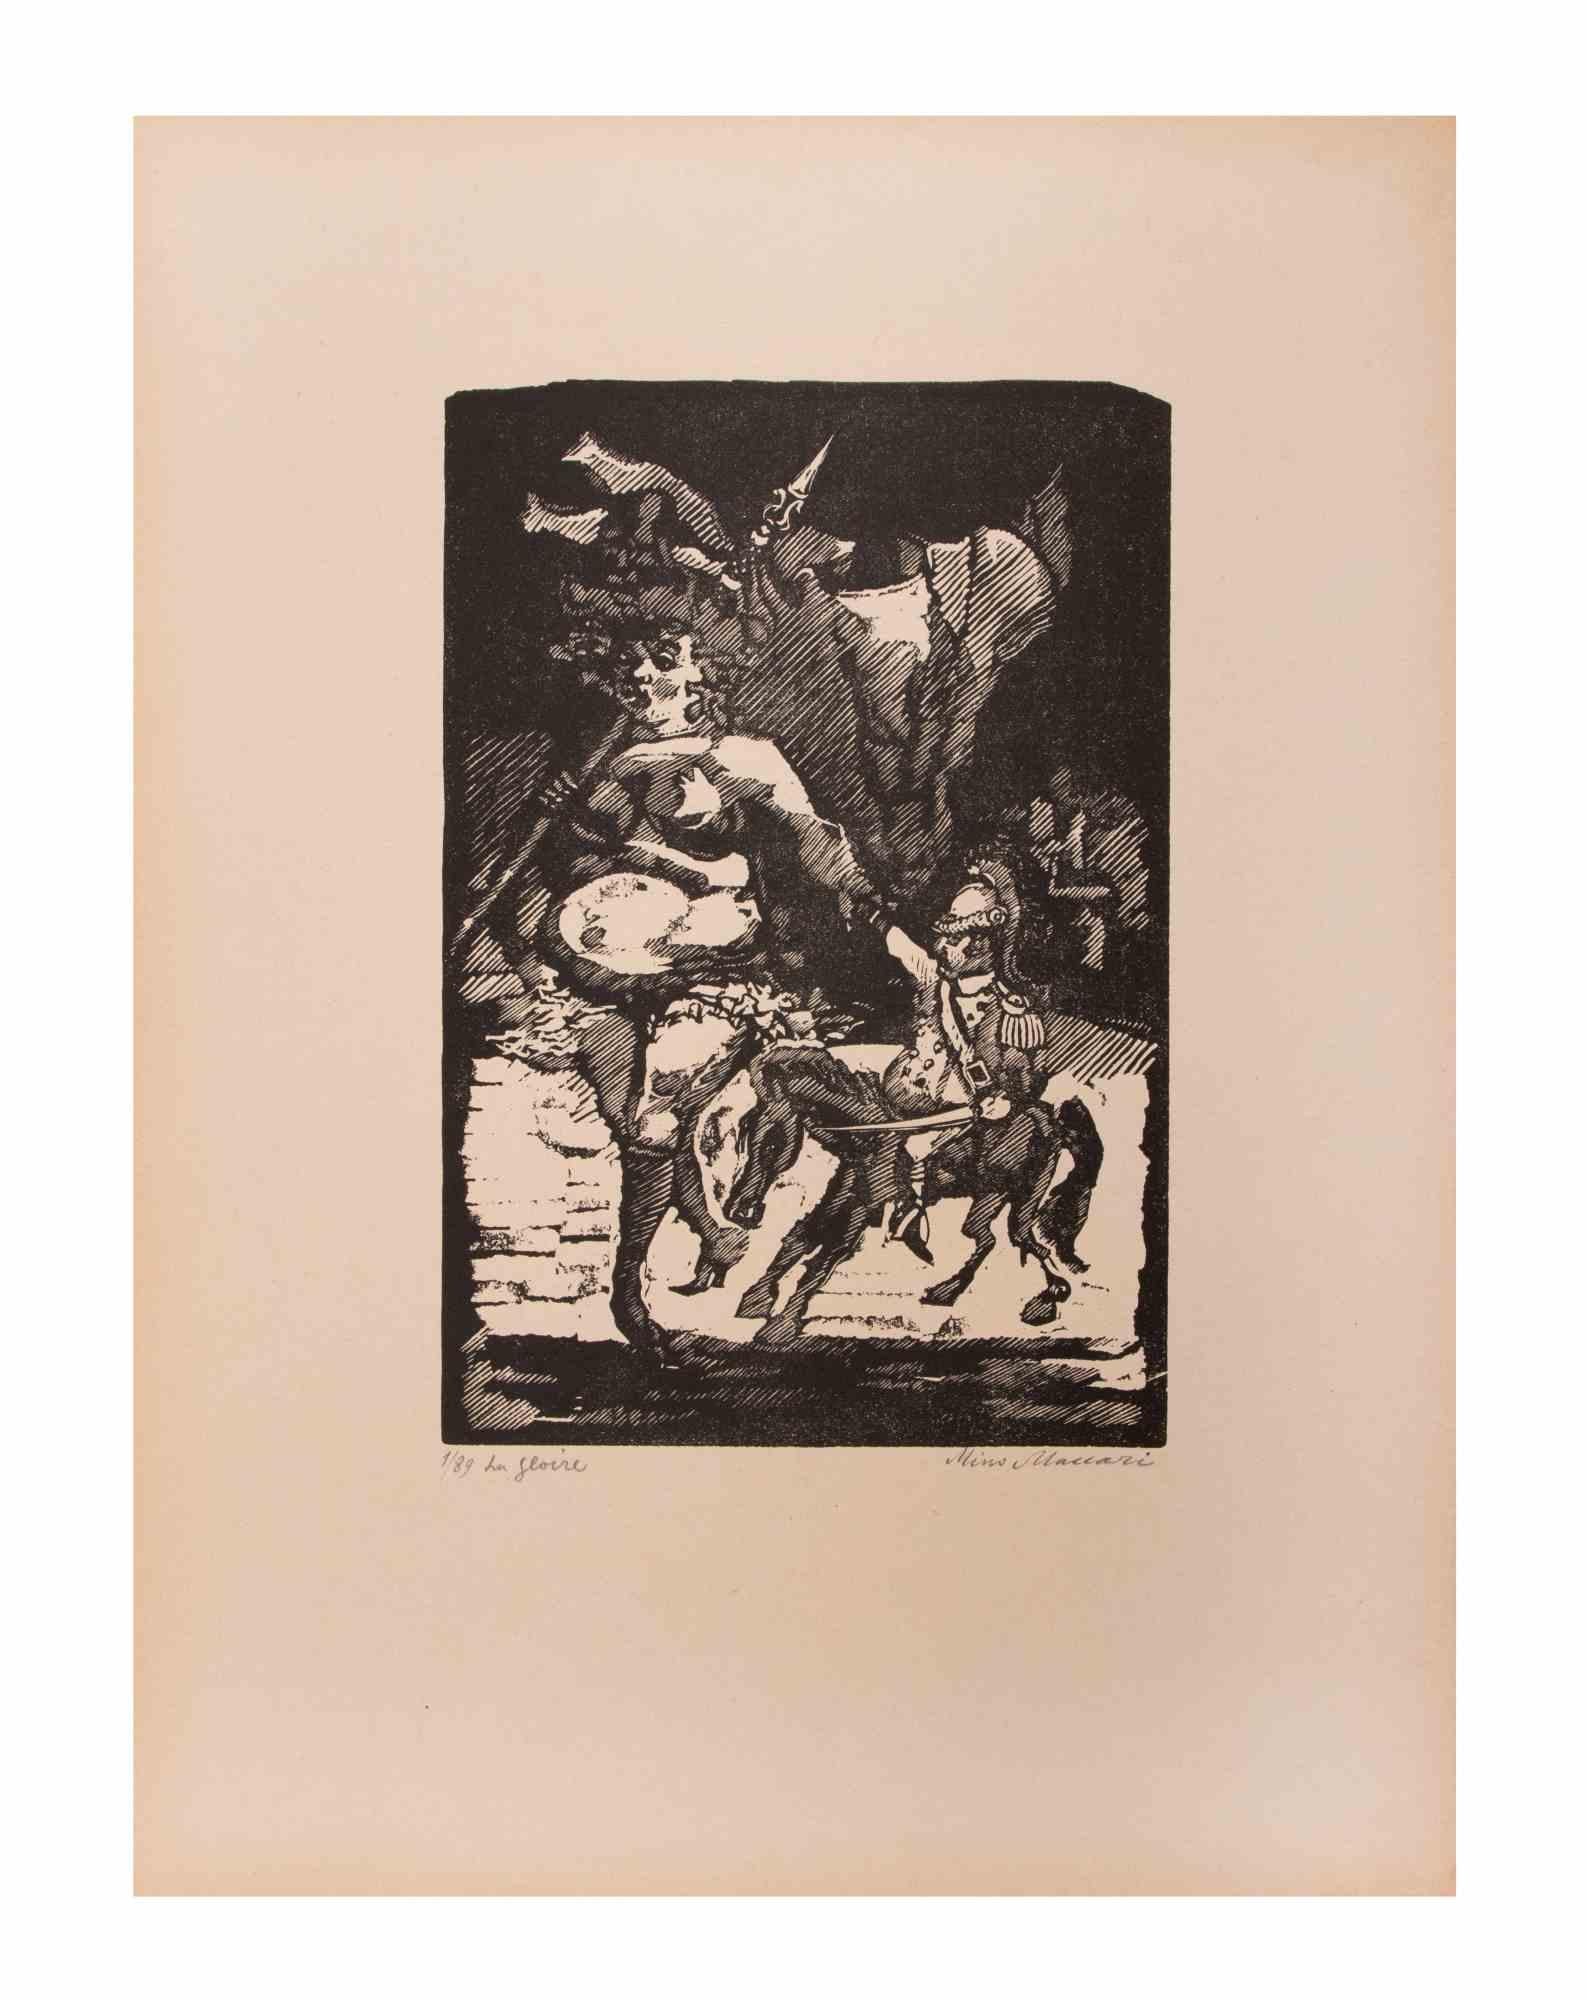 La Gloire is an Artwork realized by Mino Maccari  (1924-1989) in the Mid-20th Century.

B./W. Woodcut on paper. Hand-signed on the lower, numbered 1/89 specimens and titled on the left margin.

Good conditions.

Mino Maccari (Siena, 1924-Rome, June